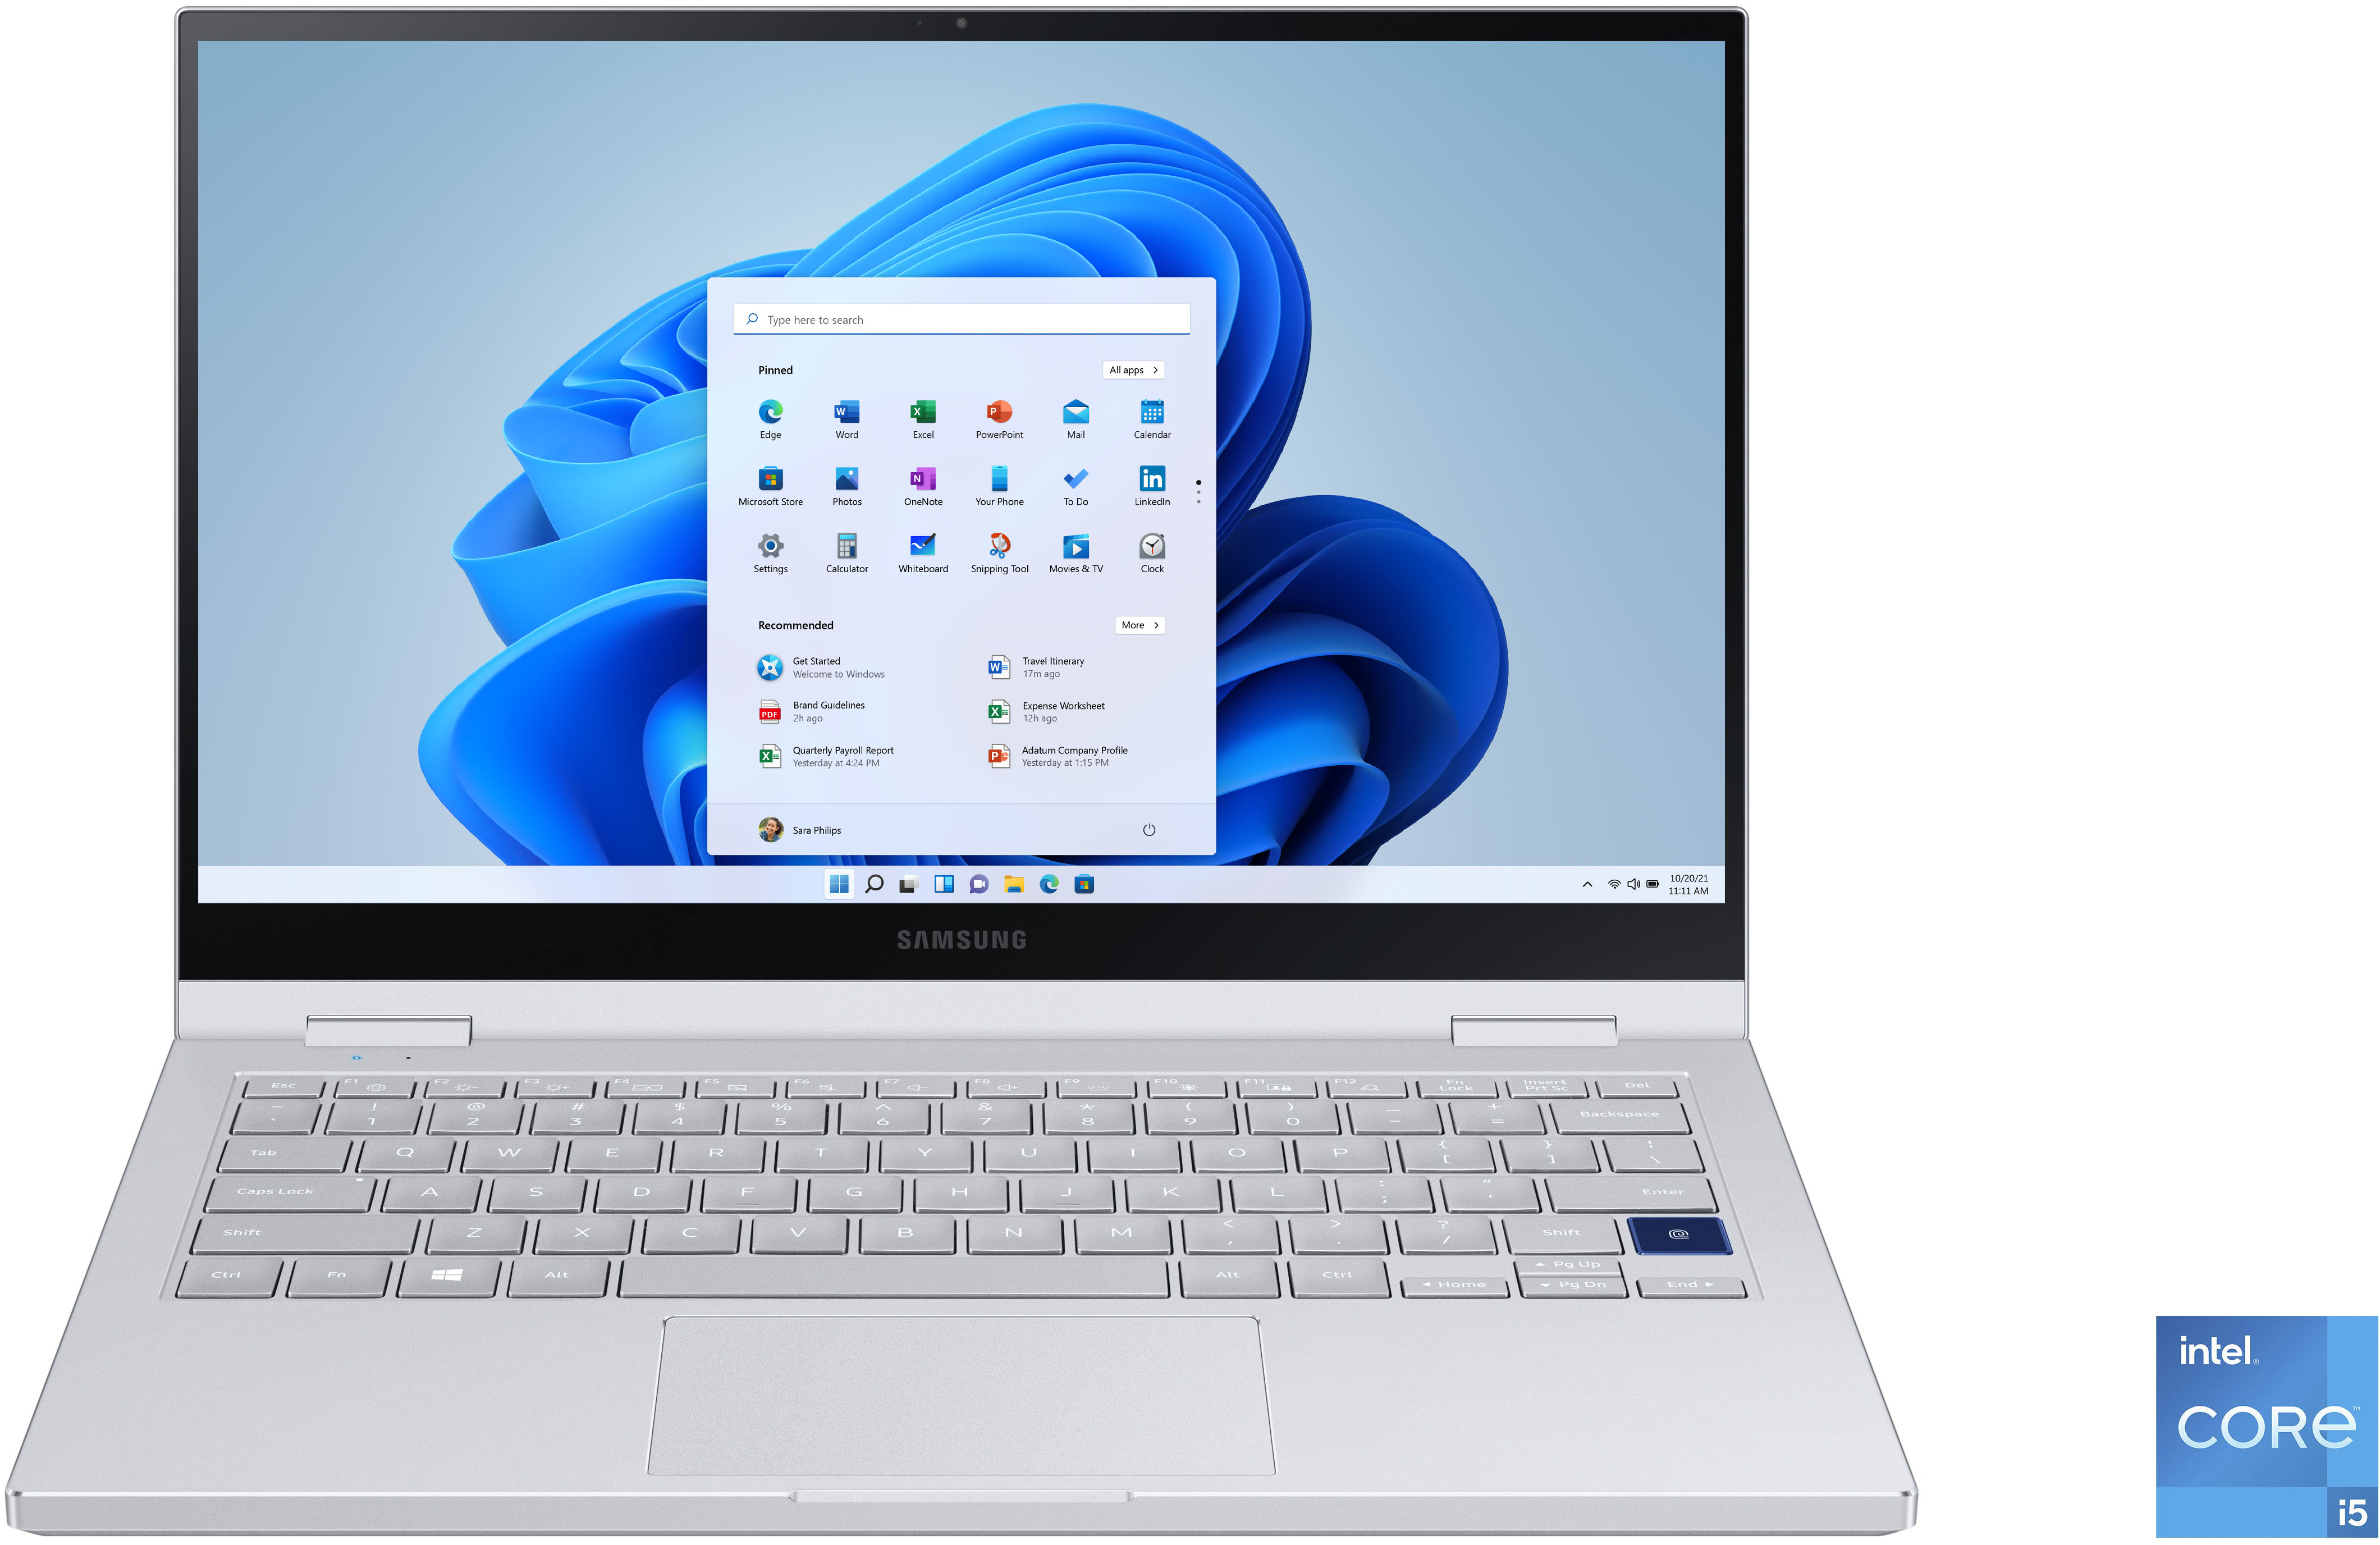 Zoom out on Front Zoom. Samsung - Galaxy Book Flex2 Alpha 13.3" QLED Touch-Screen Laptop - Intel Core i5 - 8GB Memory - 256GB SSD - Royal Silver.